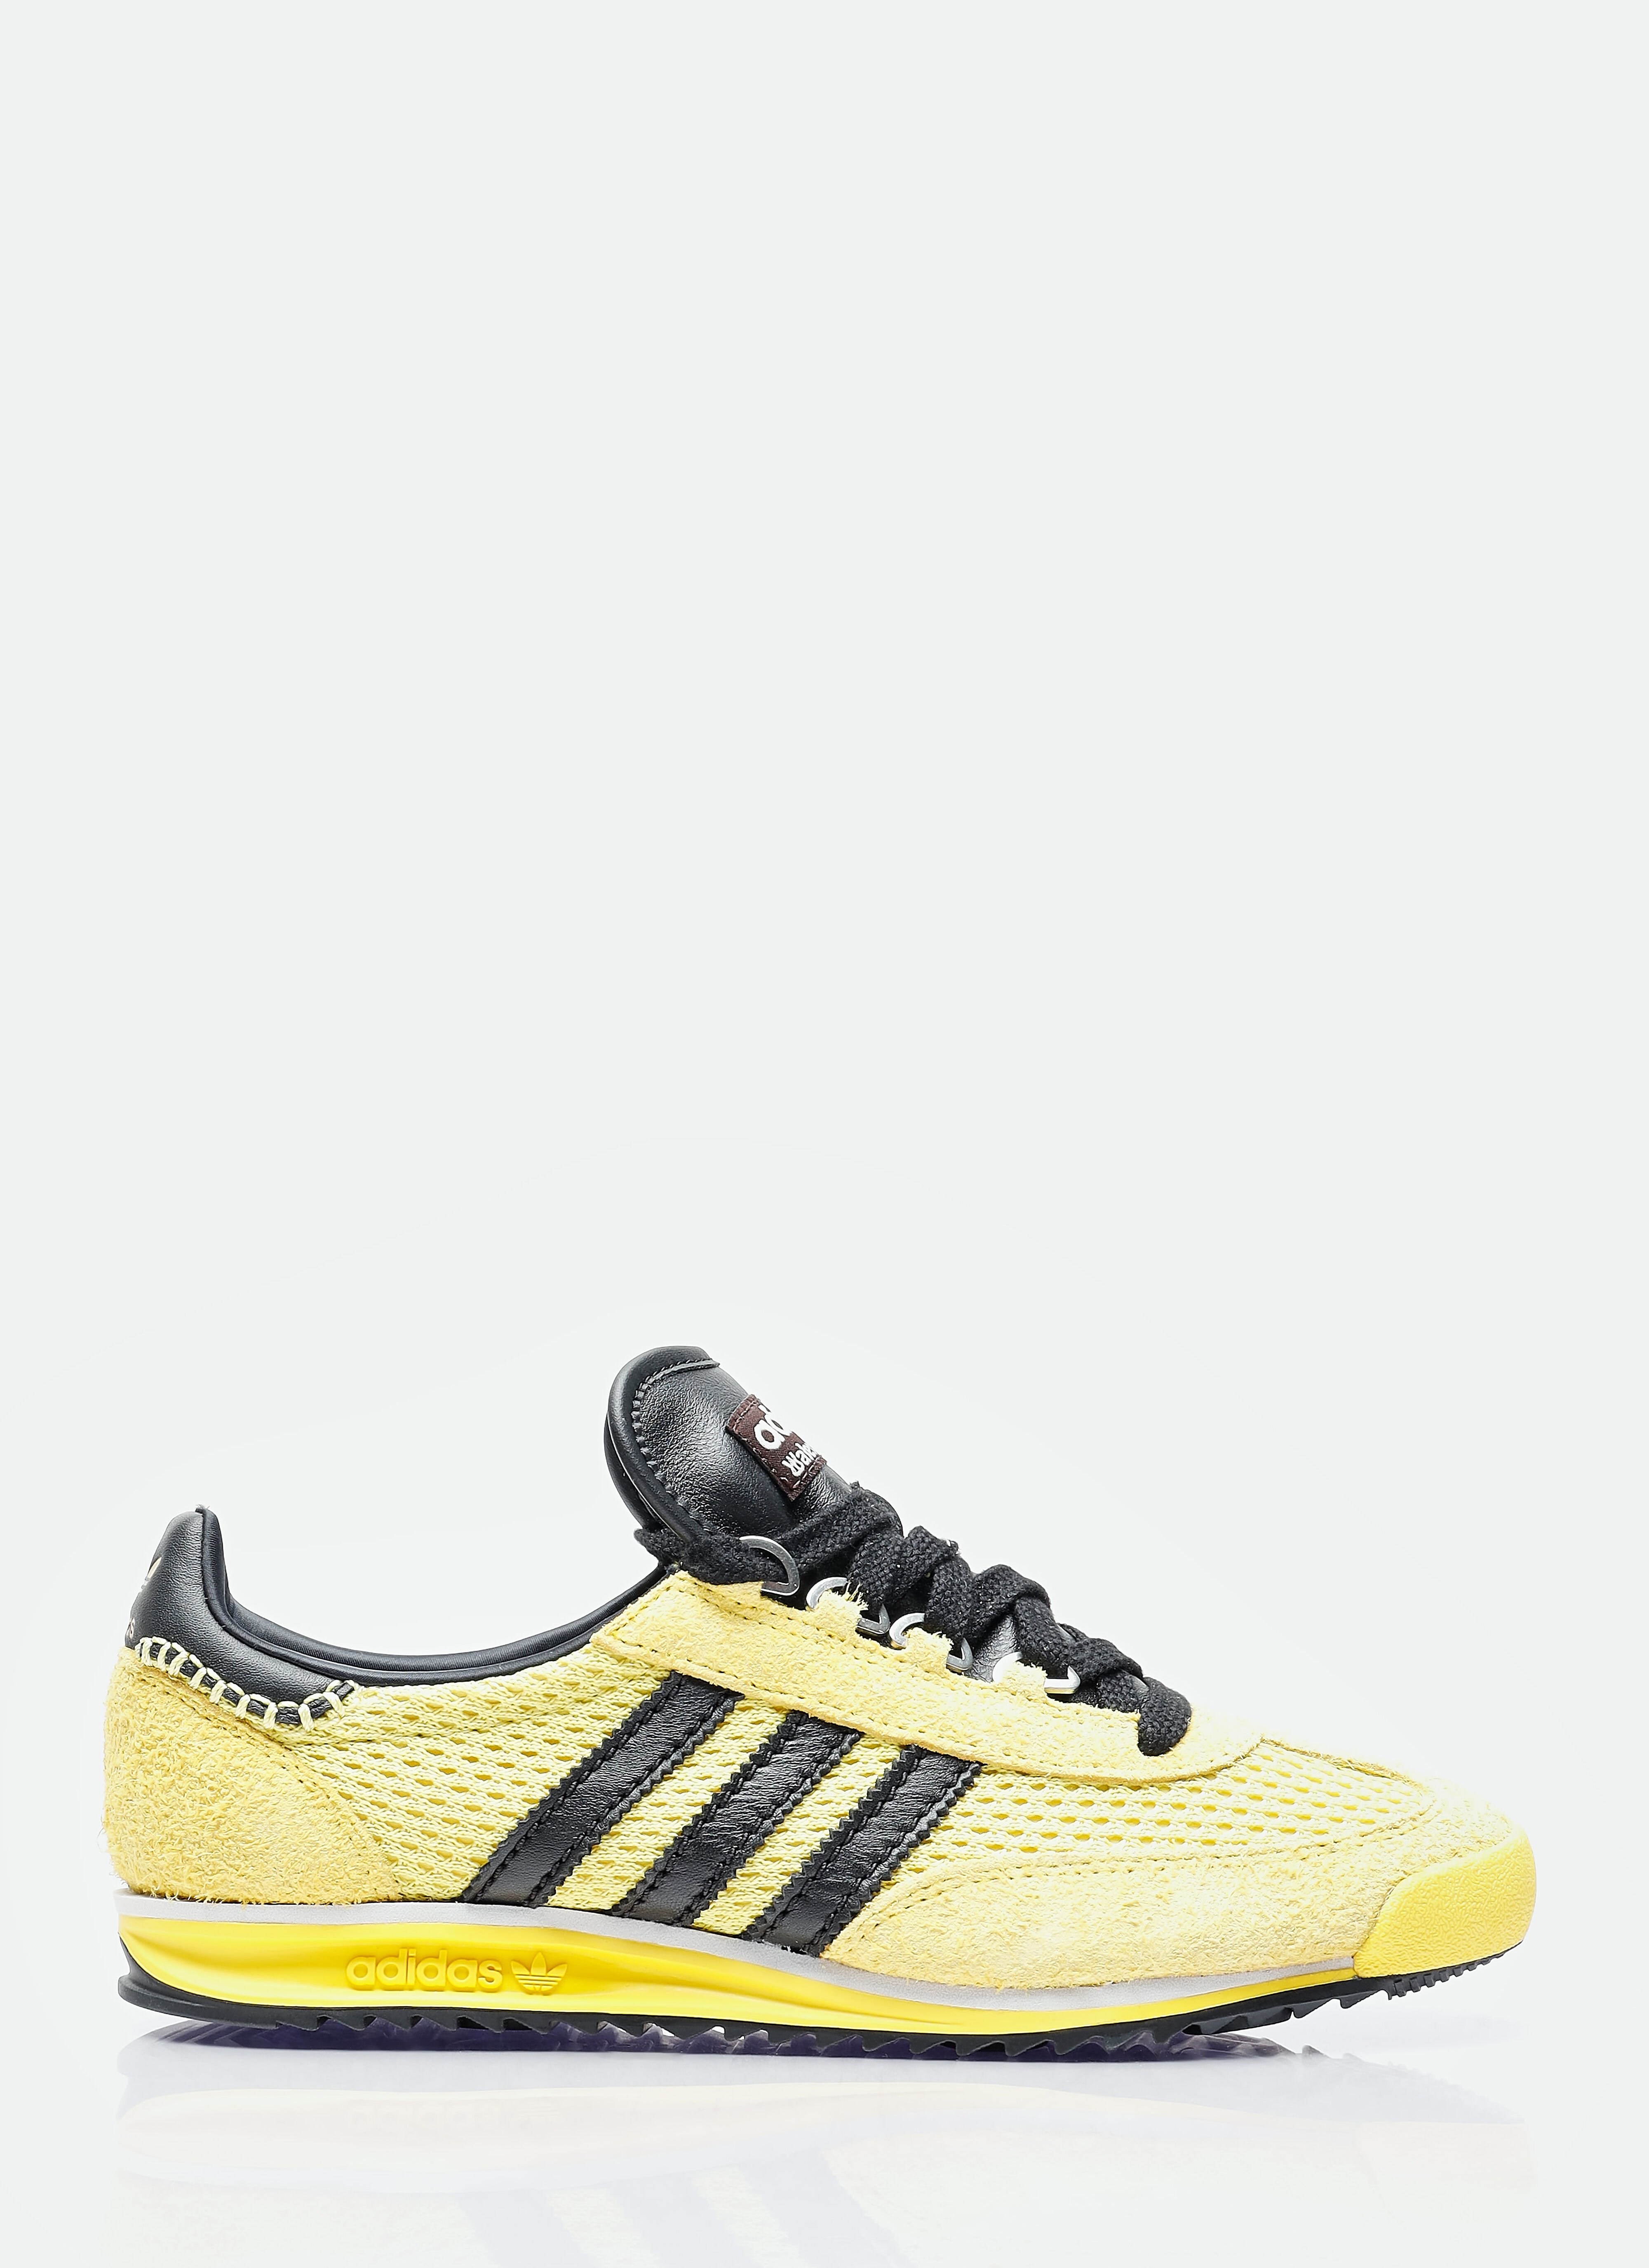 adidas by Wales Bonner SL76 Sneakers Blue awb0357015